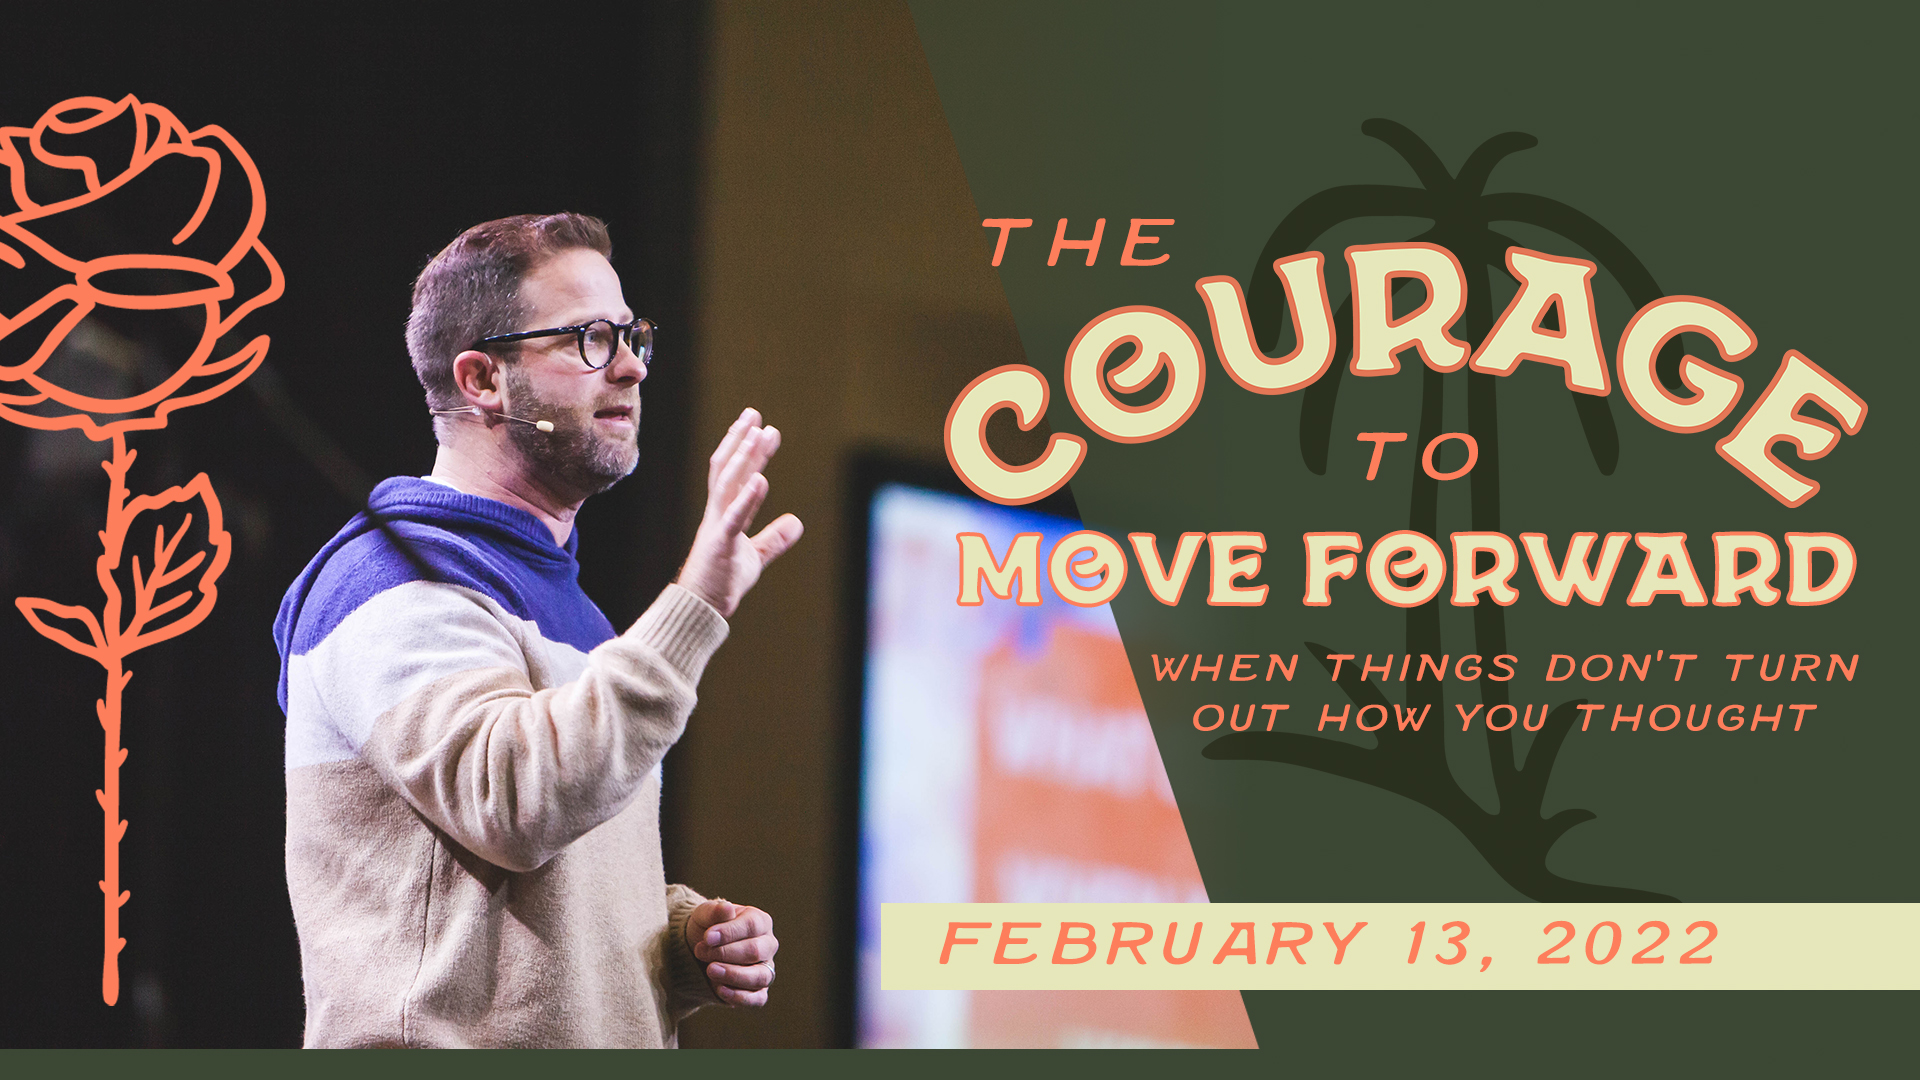 Courage to Move Forward